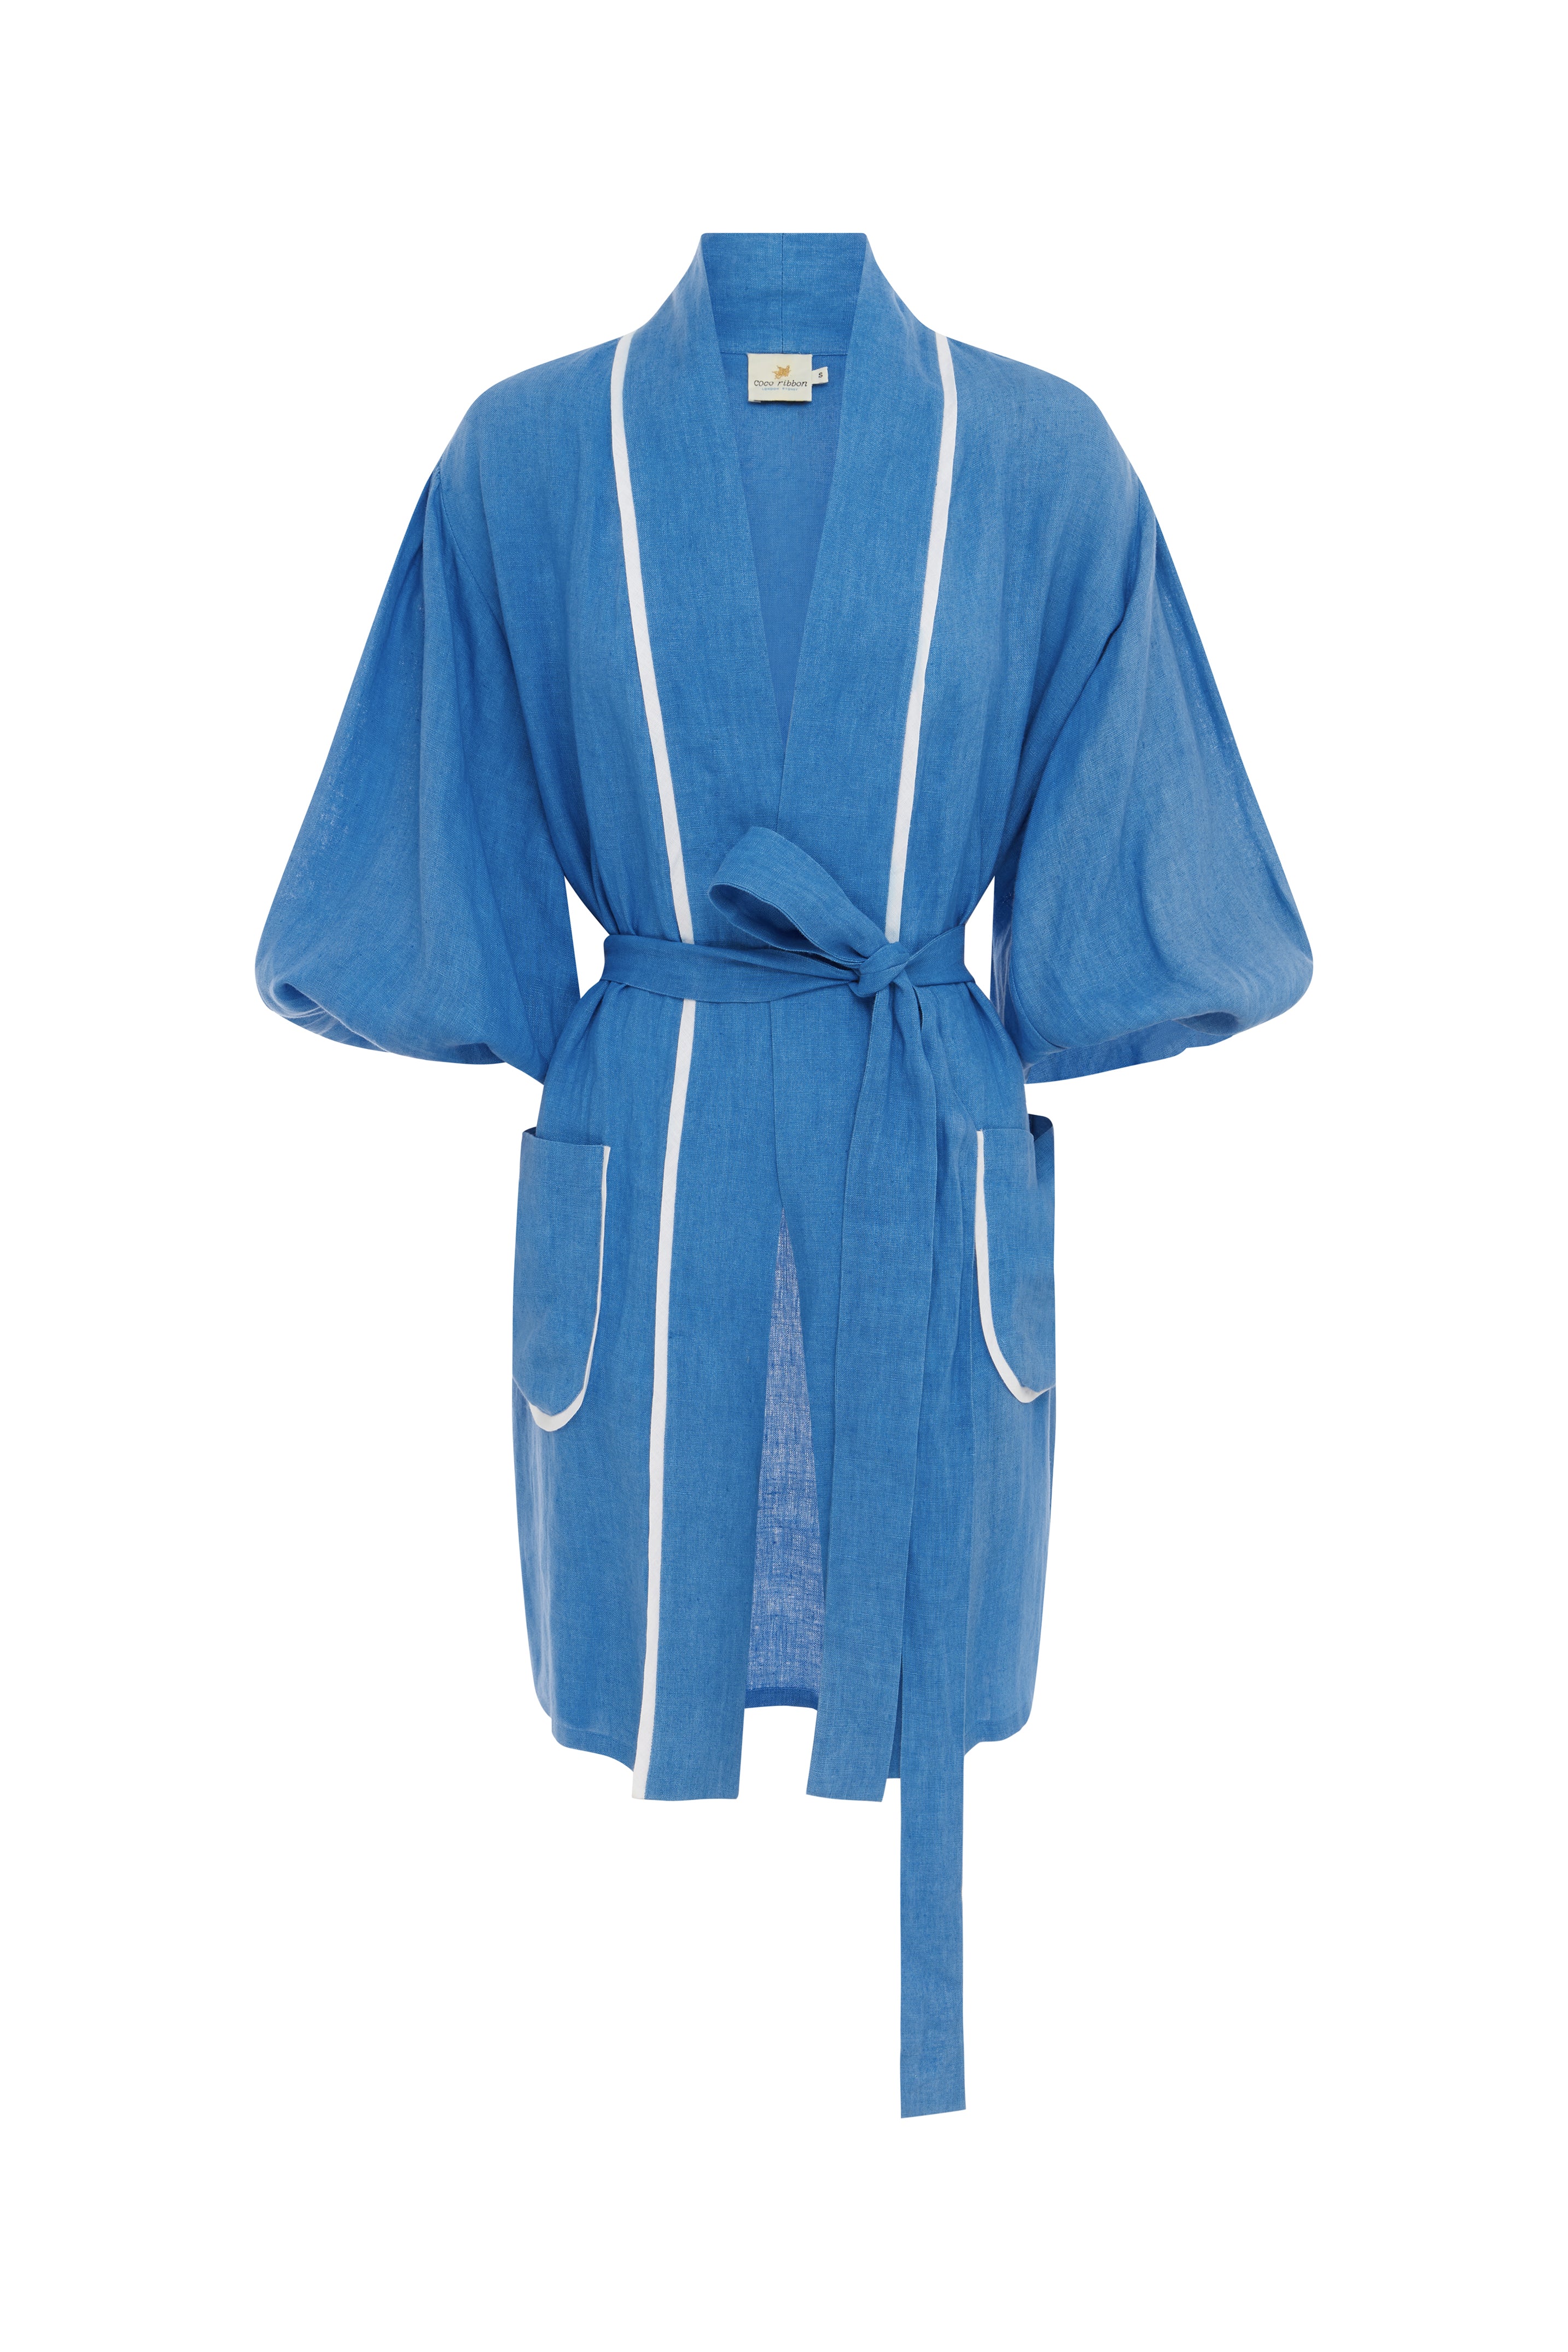 LONG Cape Amarin Beach-to-Bar Robe in Solid Blue